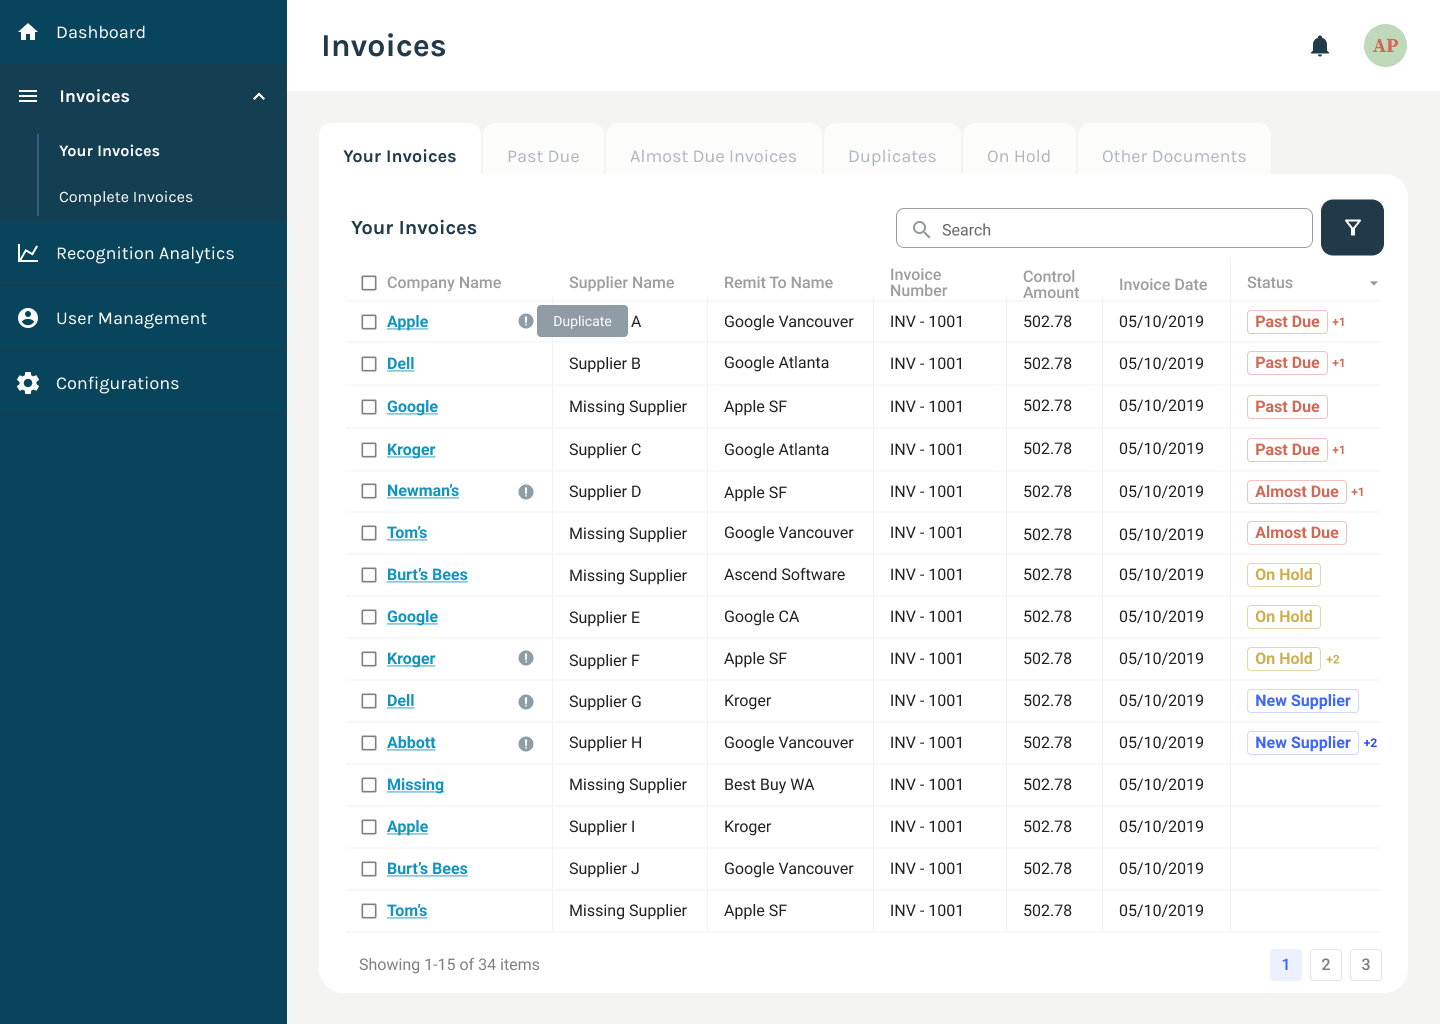 Invoice Dashboard- Modern, clean user experience with advanced filtering helps your team build efficiency and prioritize better.